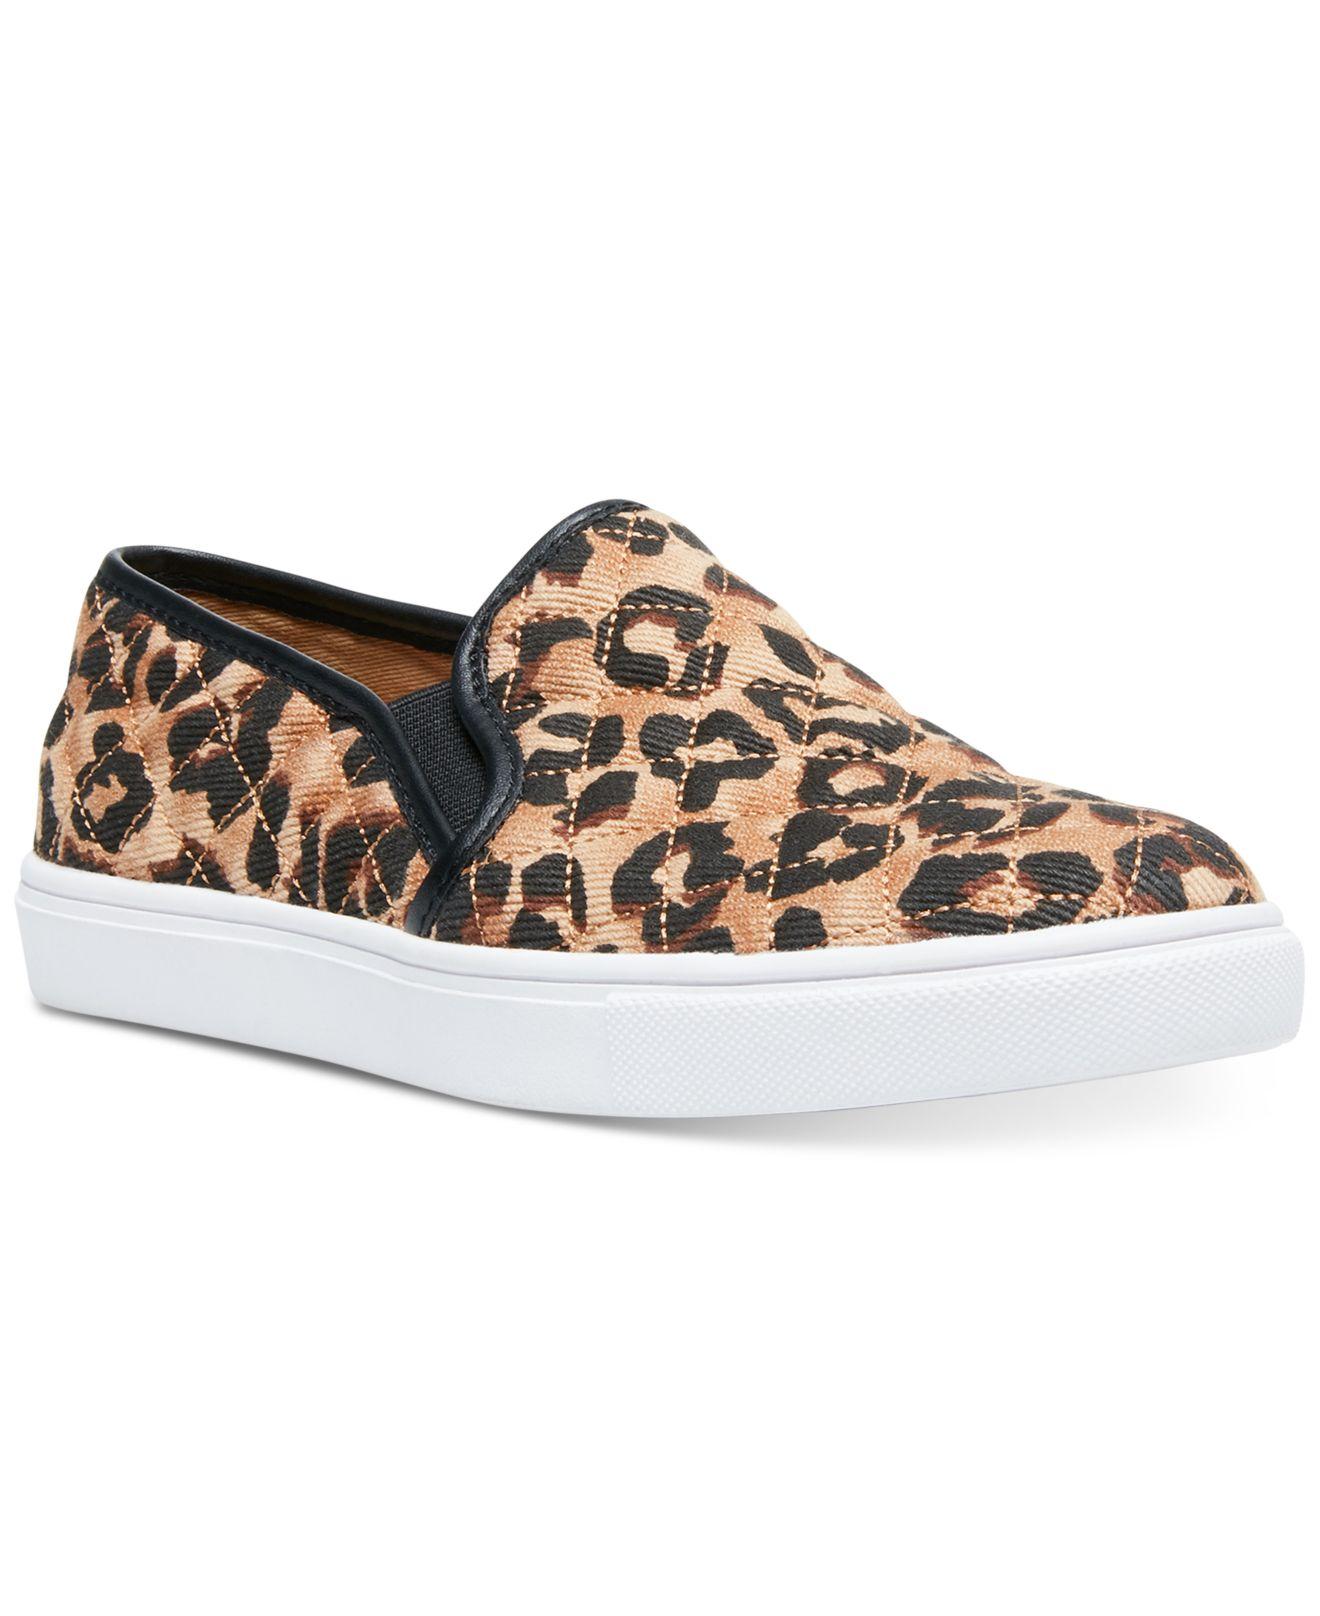 Steve Madden Ecentrcq Leopard Quilted Slip-on Sneakers in Brown - Lyst